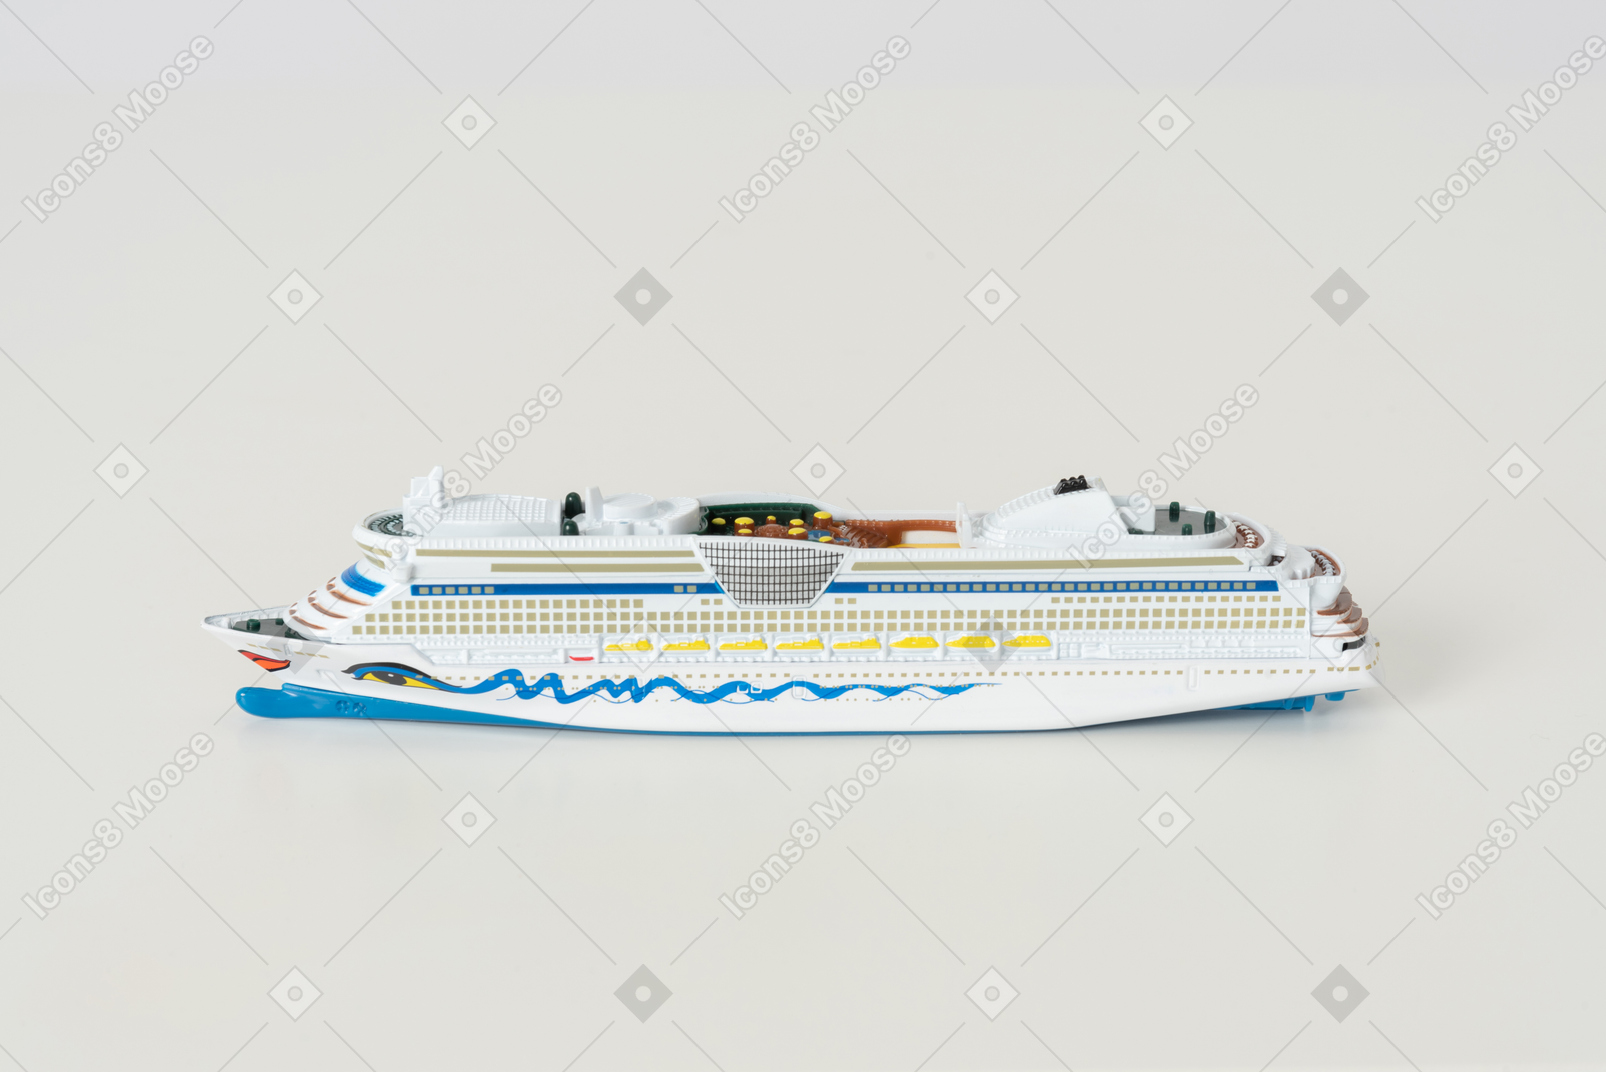 The toy cruise ship on the light grey background